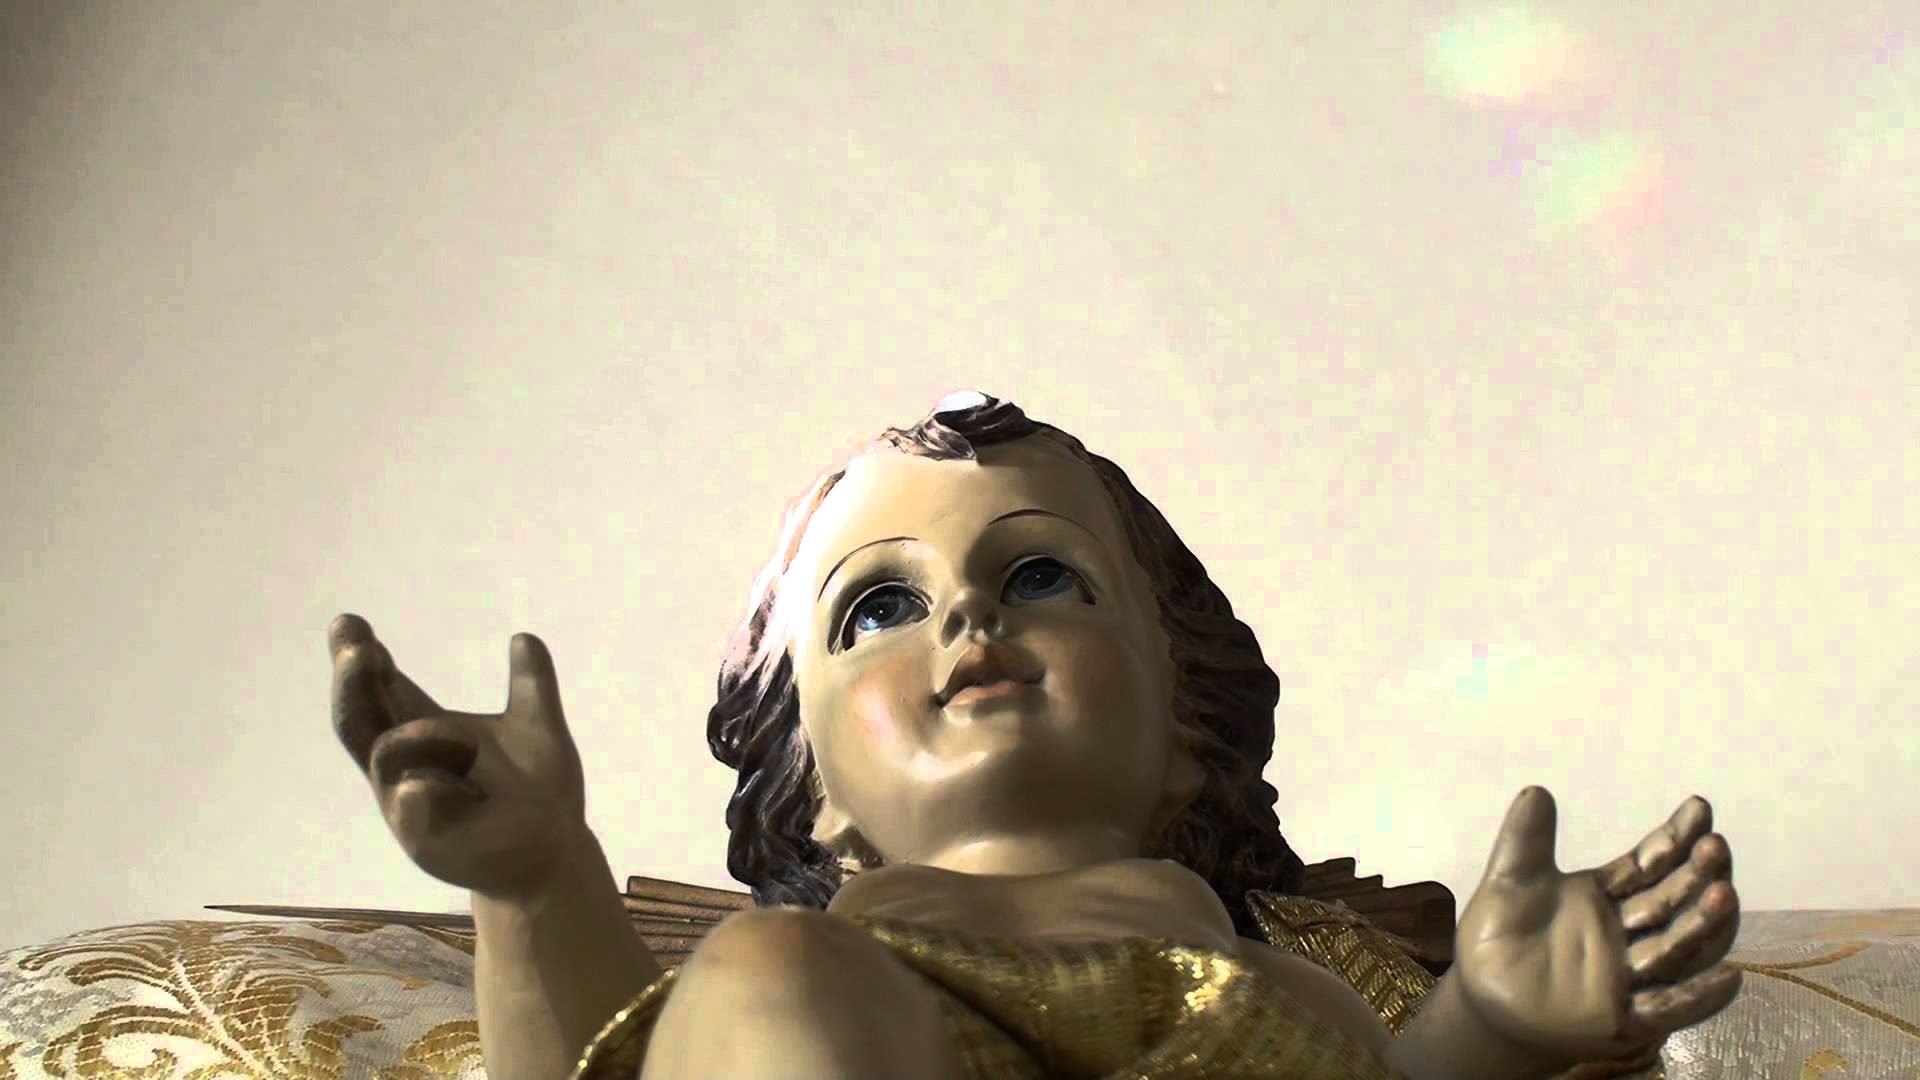 1920x1080 Baby Jesus Statue Moving Hands? Miracle, Illusion, Sign?